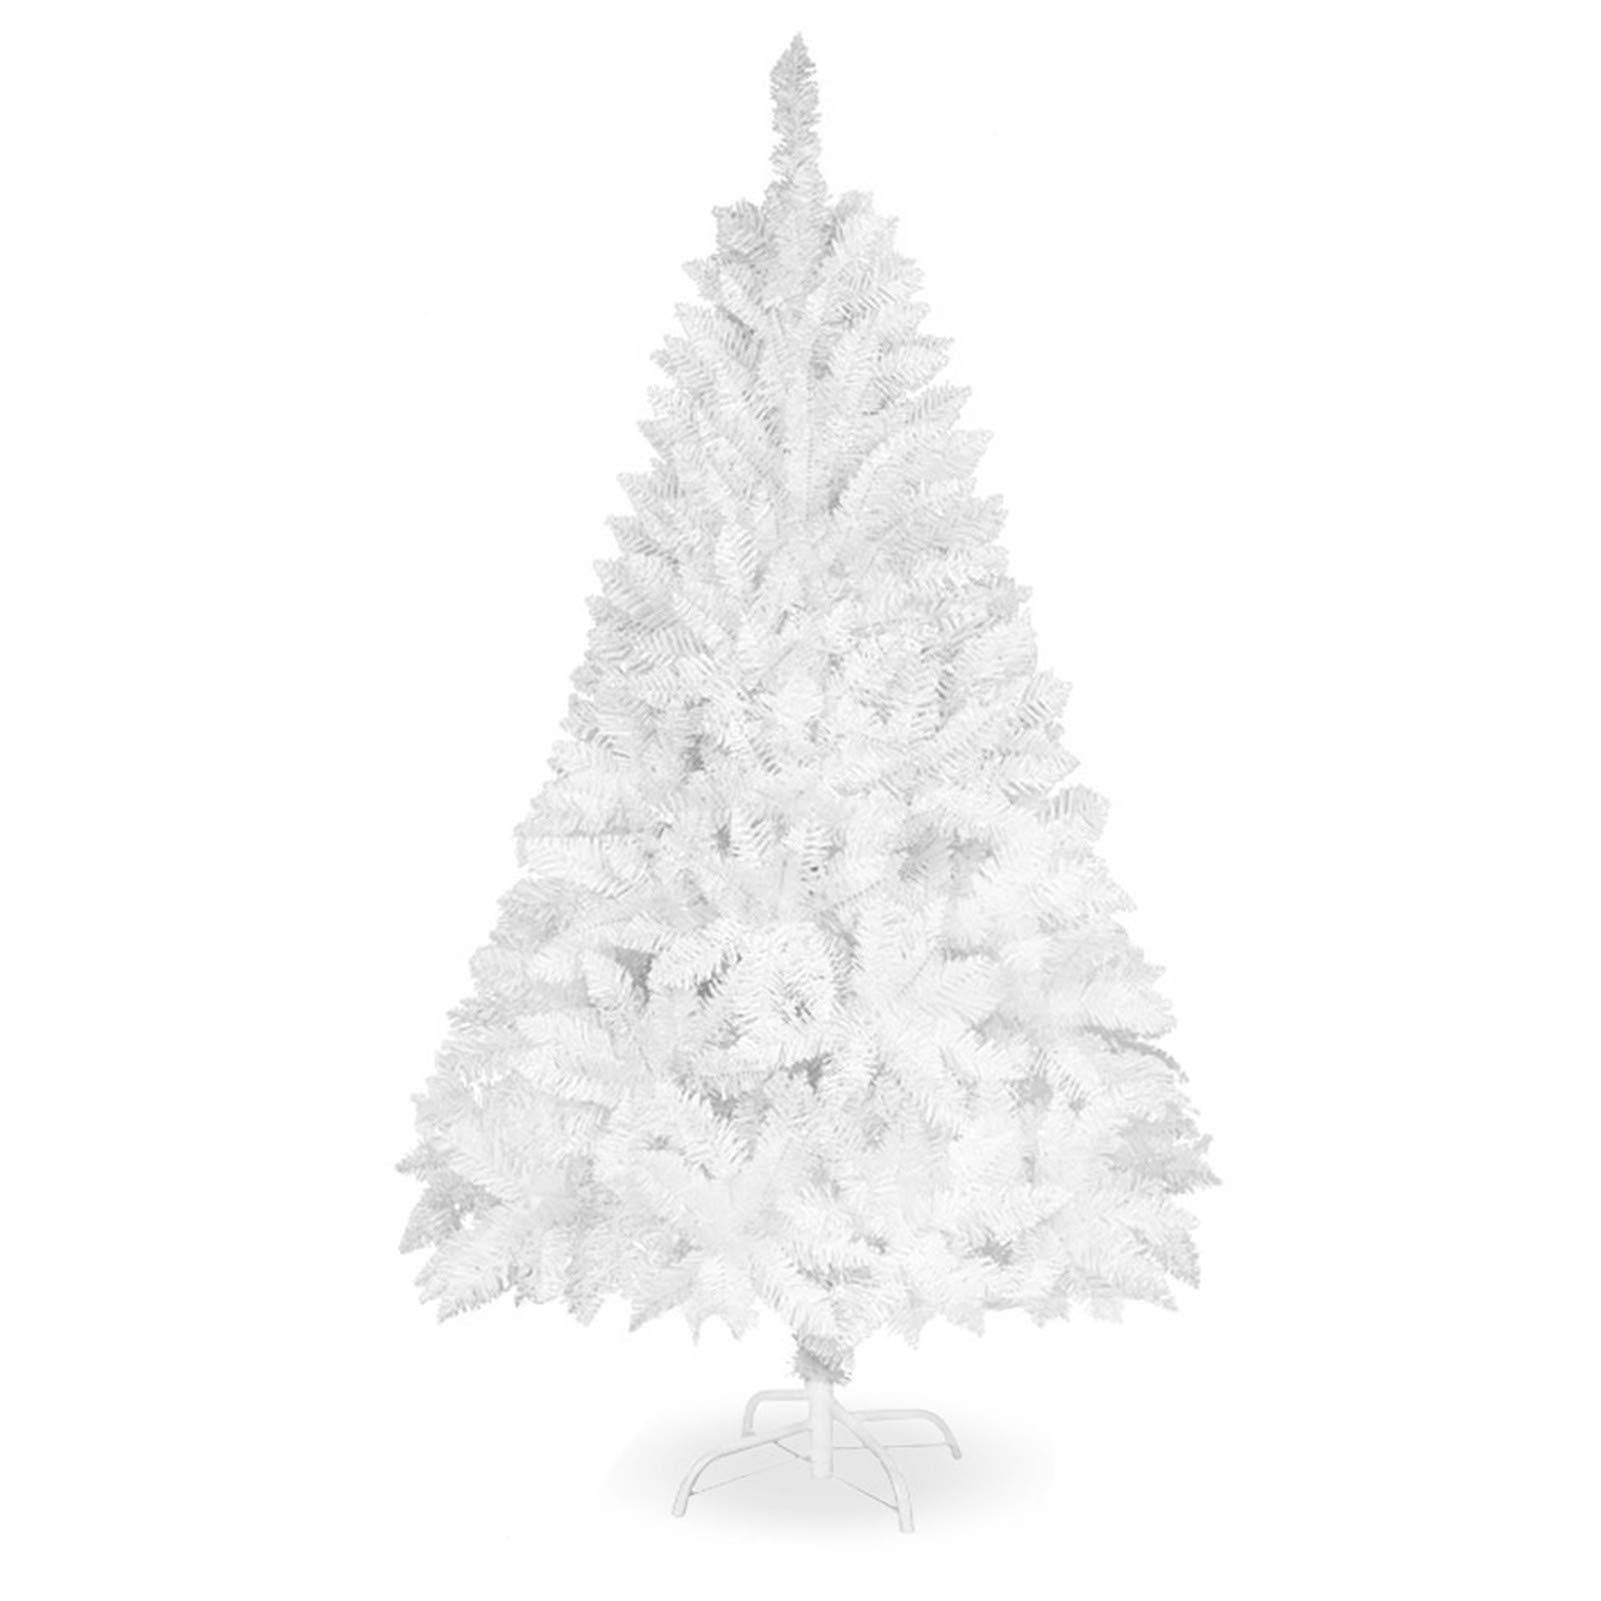 Sibosen 8 ft Premium Artificial Christmas Tree for Holiday Indoor Outdoor Party Decoration w/ 1400 B | Amazon (US)